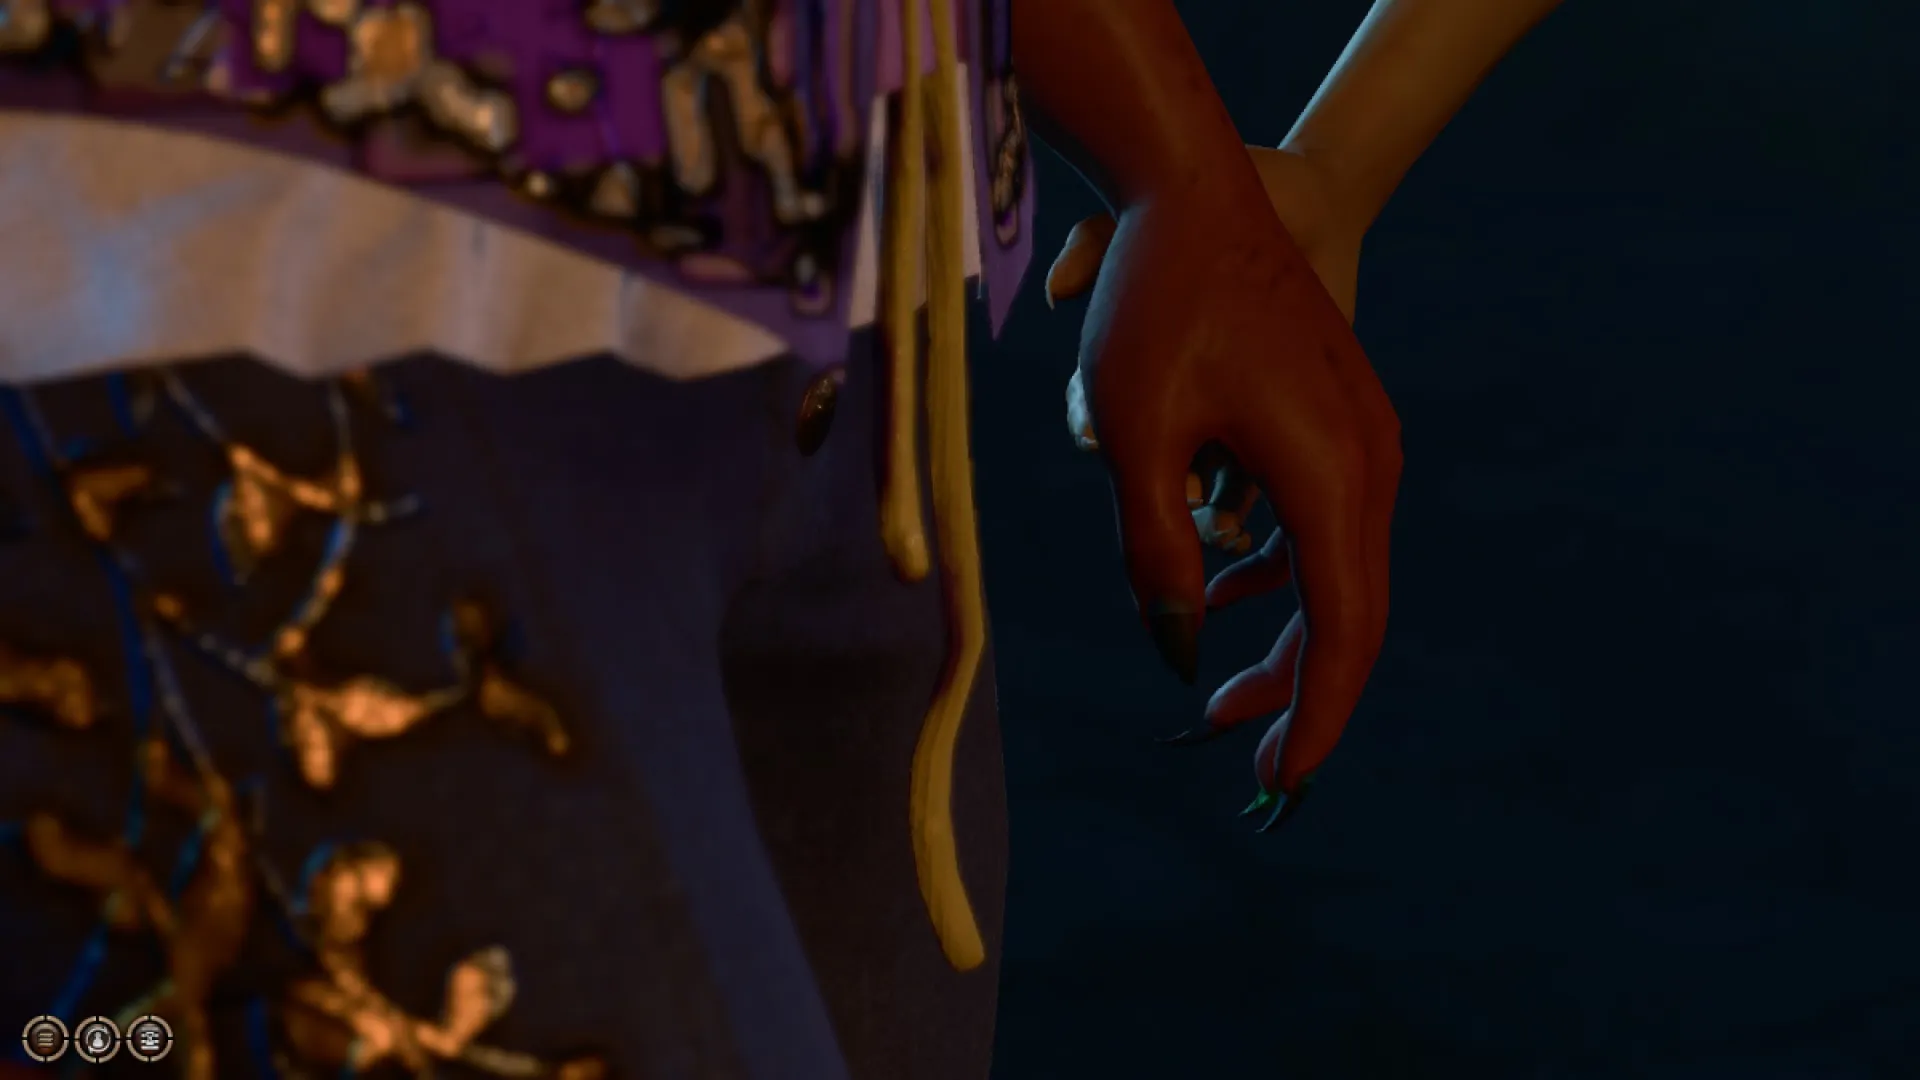 The only SFW image I have of me and Lae'zel from 'Baldur's Gate 3' is her holding my hand.